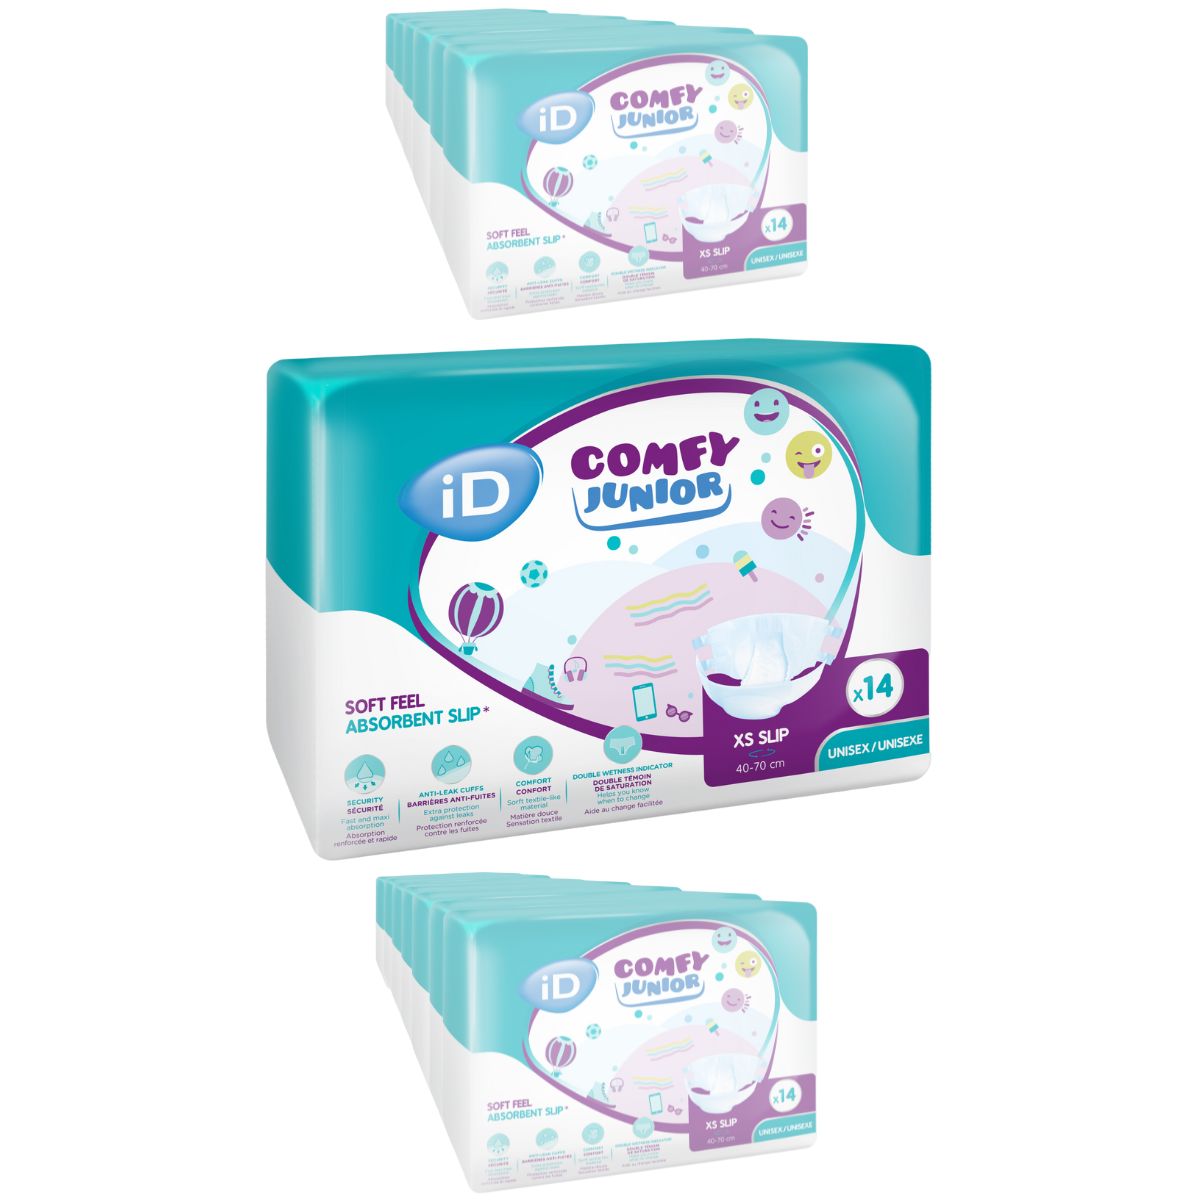 B-Sure Bowel Leakage Pads lot of 12 Boxes/24 Pads Bowel Incontinence  protection